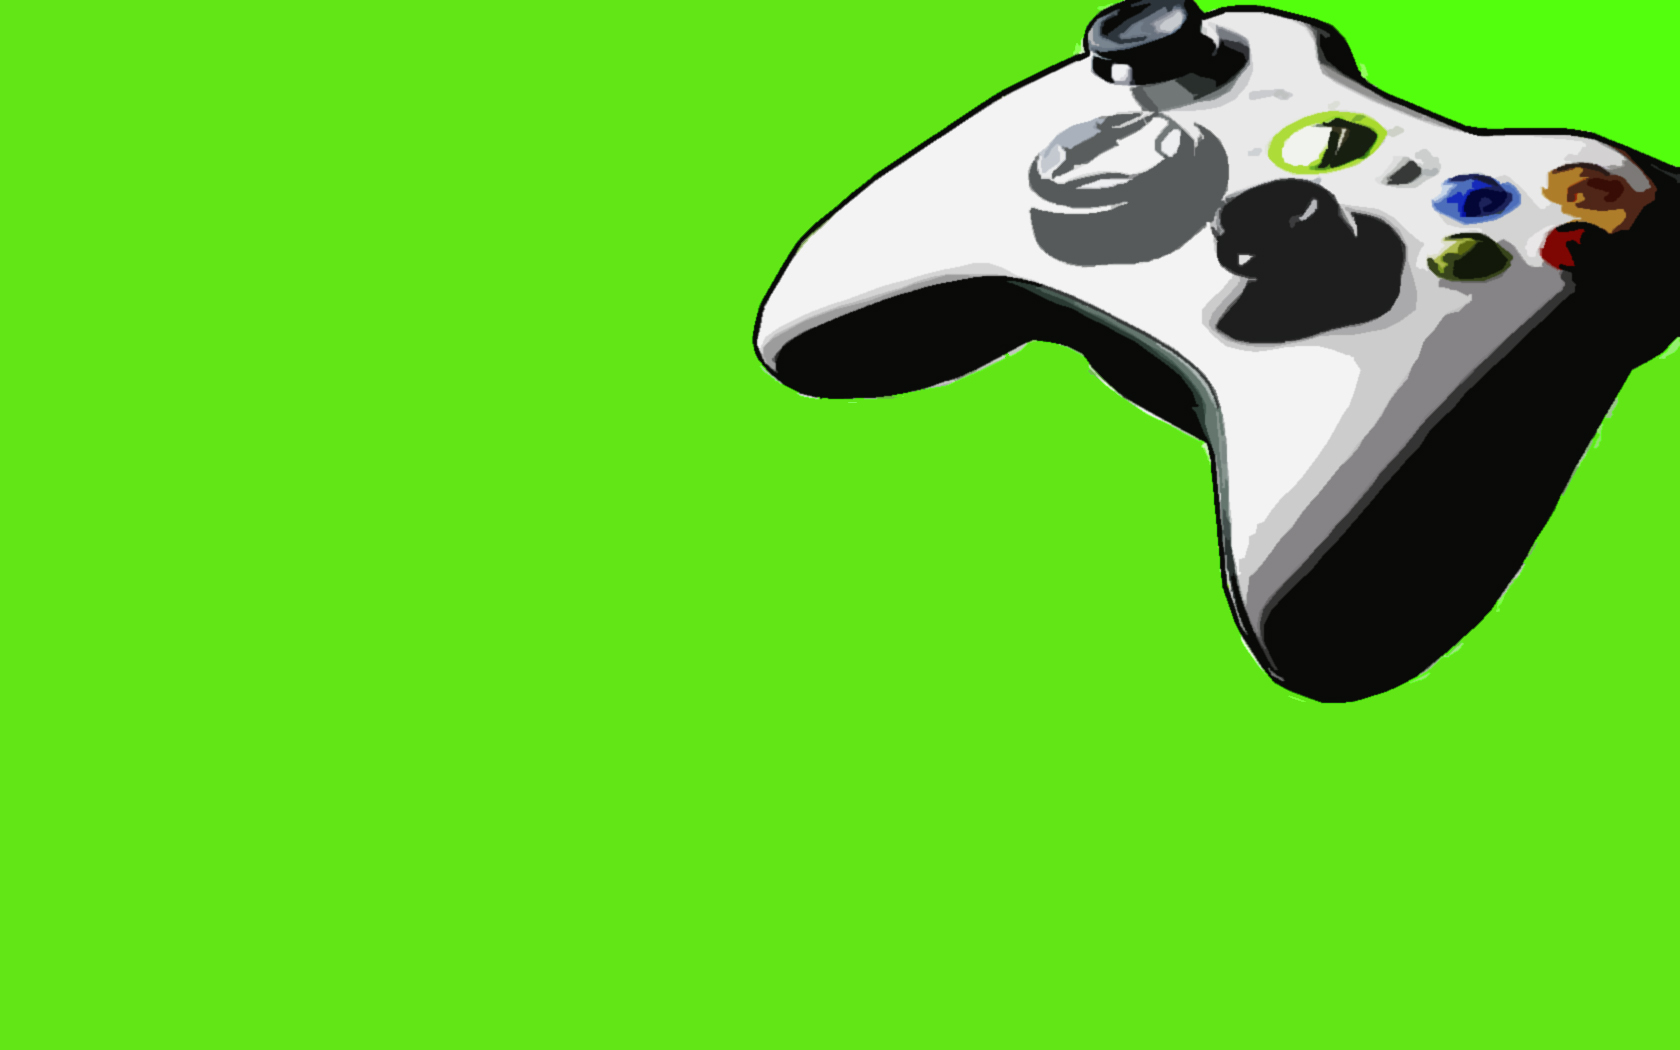 Wallpapers green video games Xbox controllers Xbox 360 simple